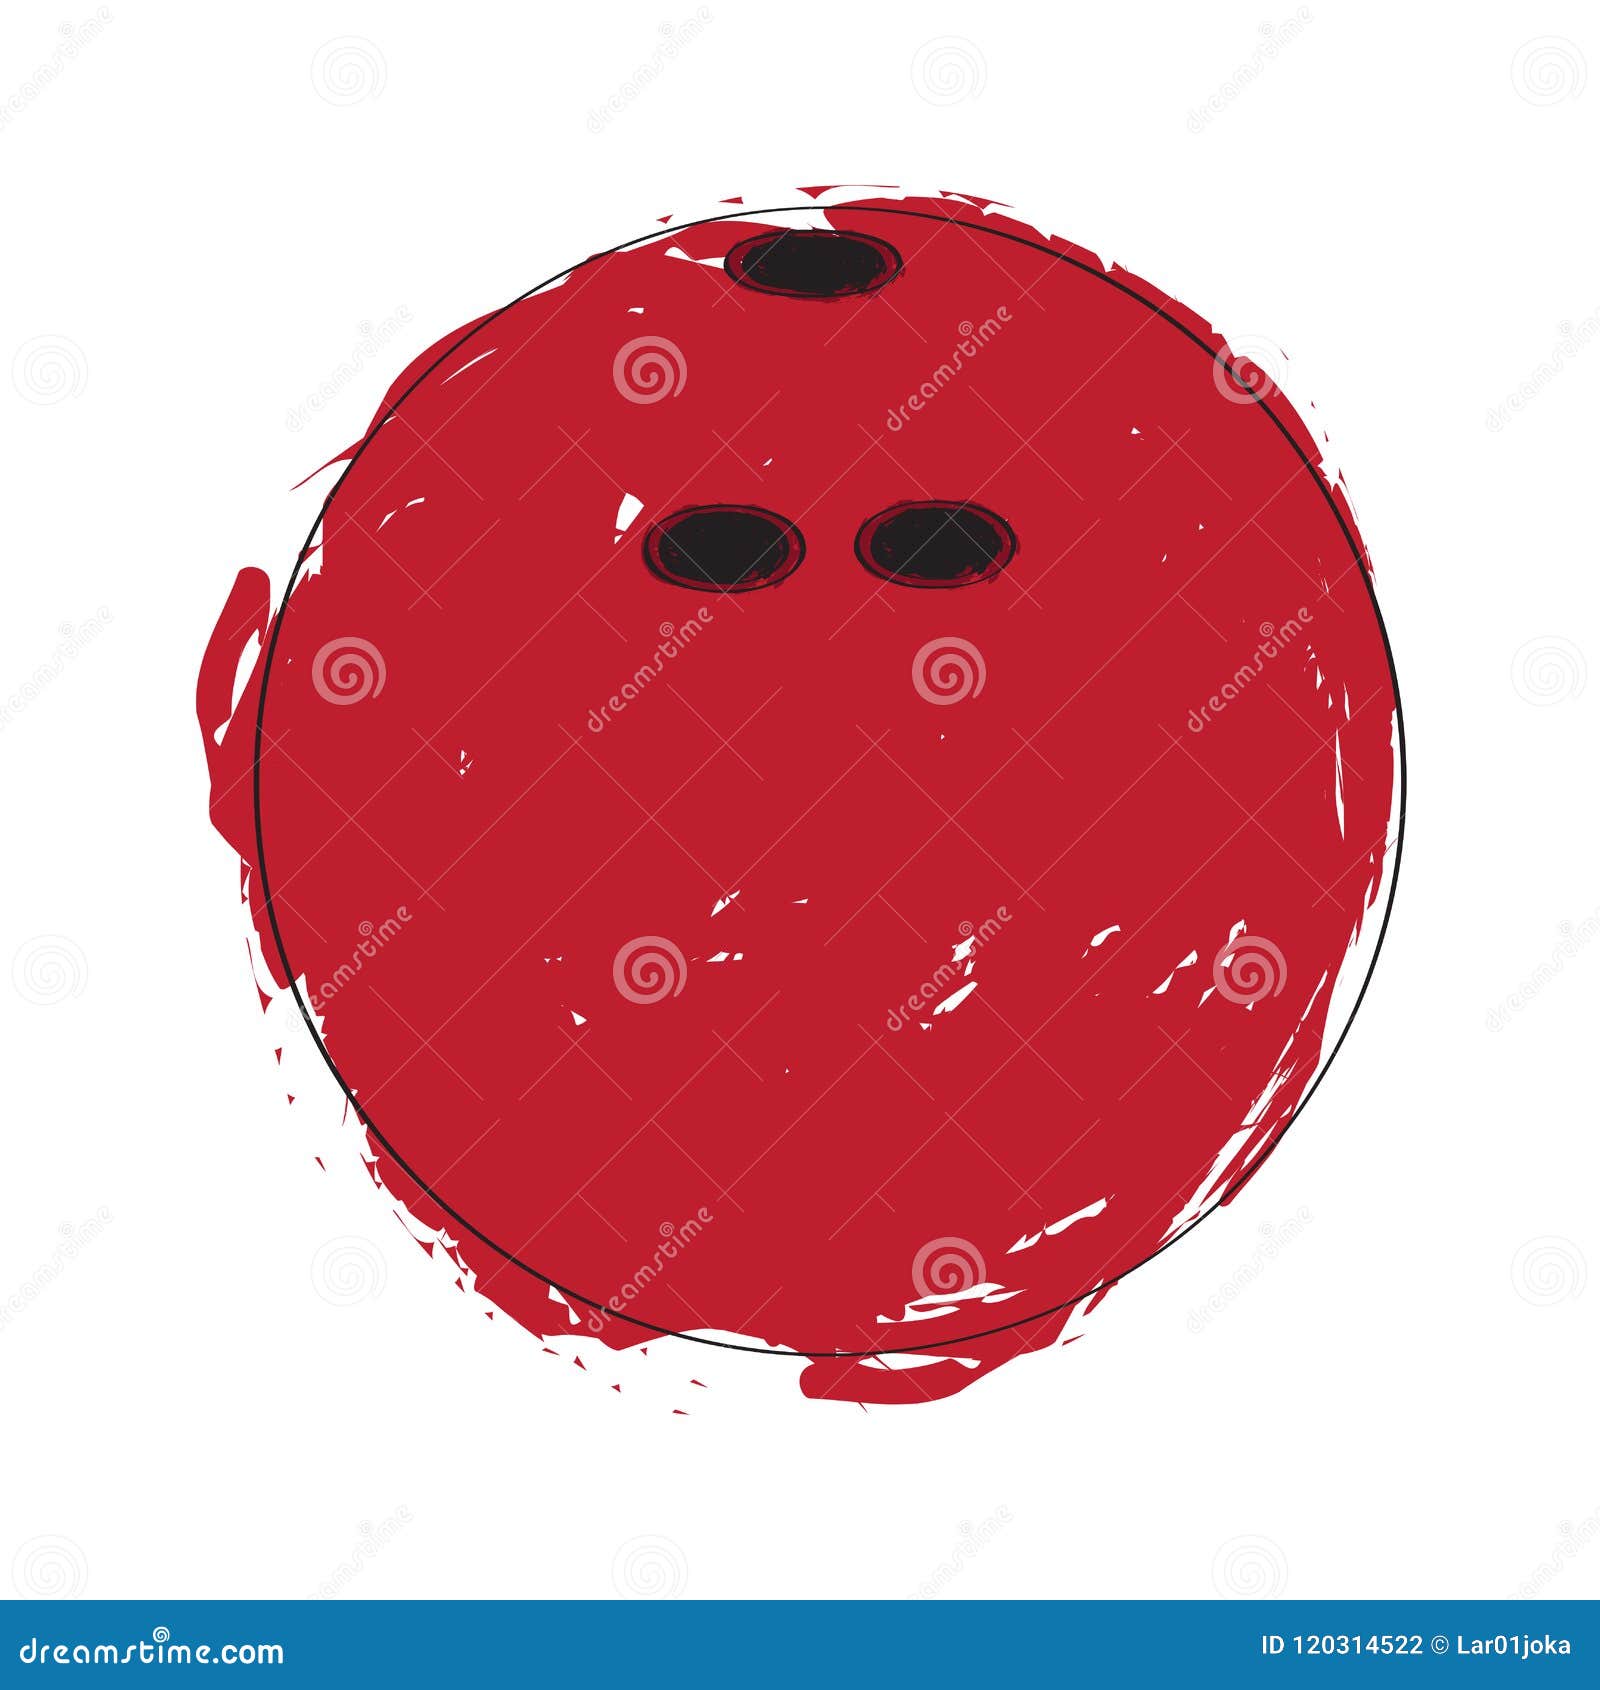 Sketch of a bowling ball stock vector. Illustration of isolated - 120314522